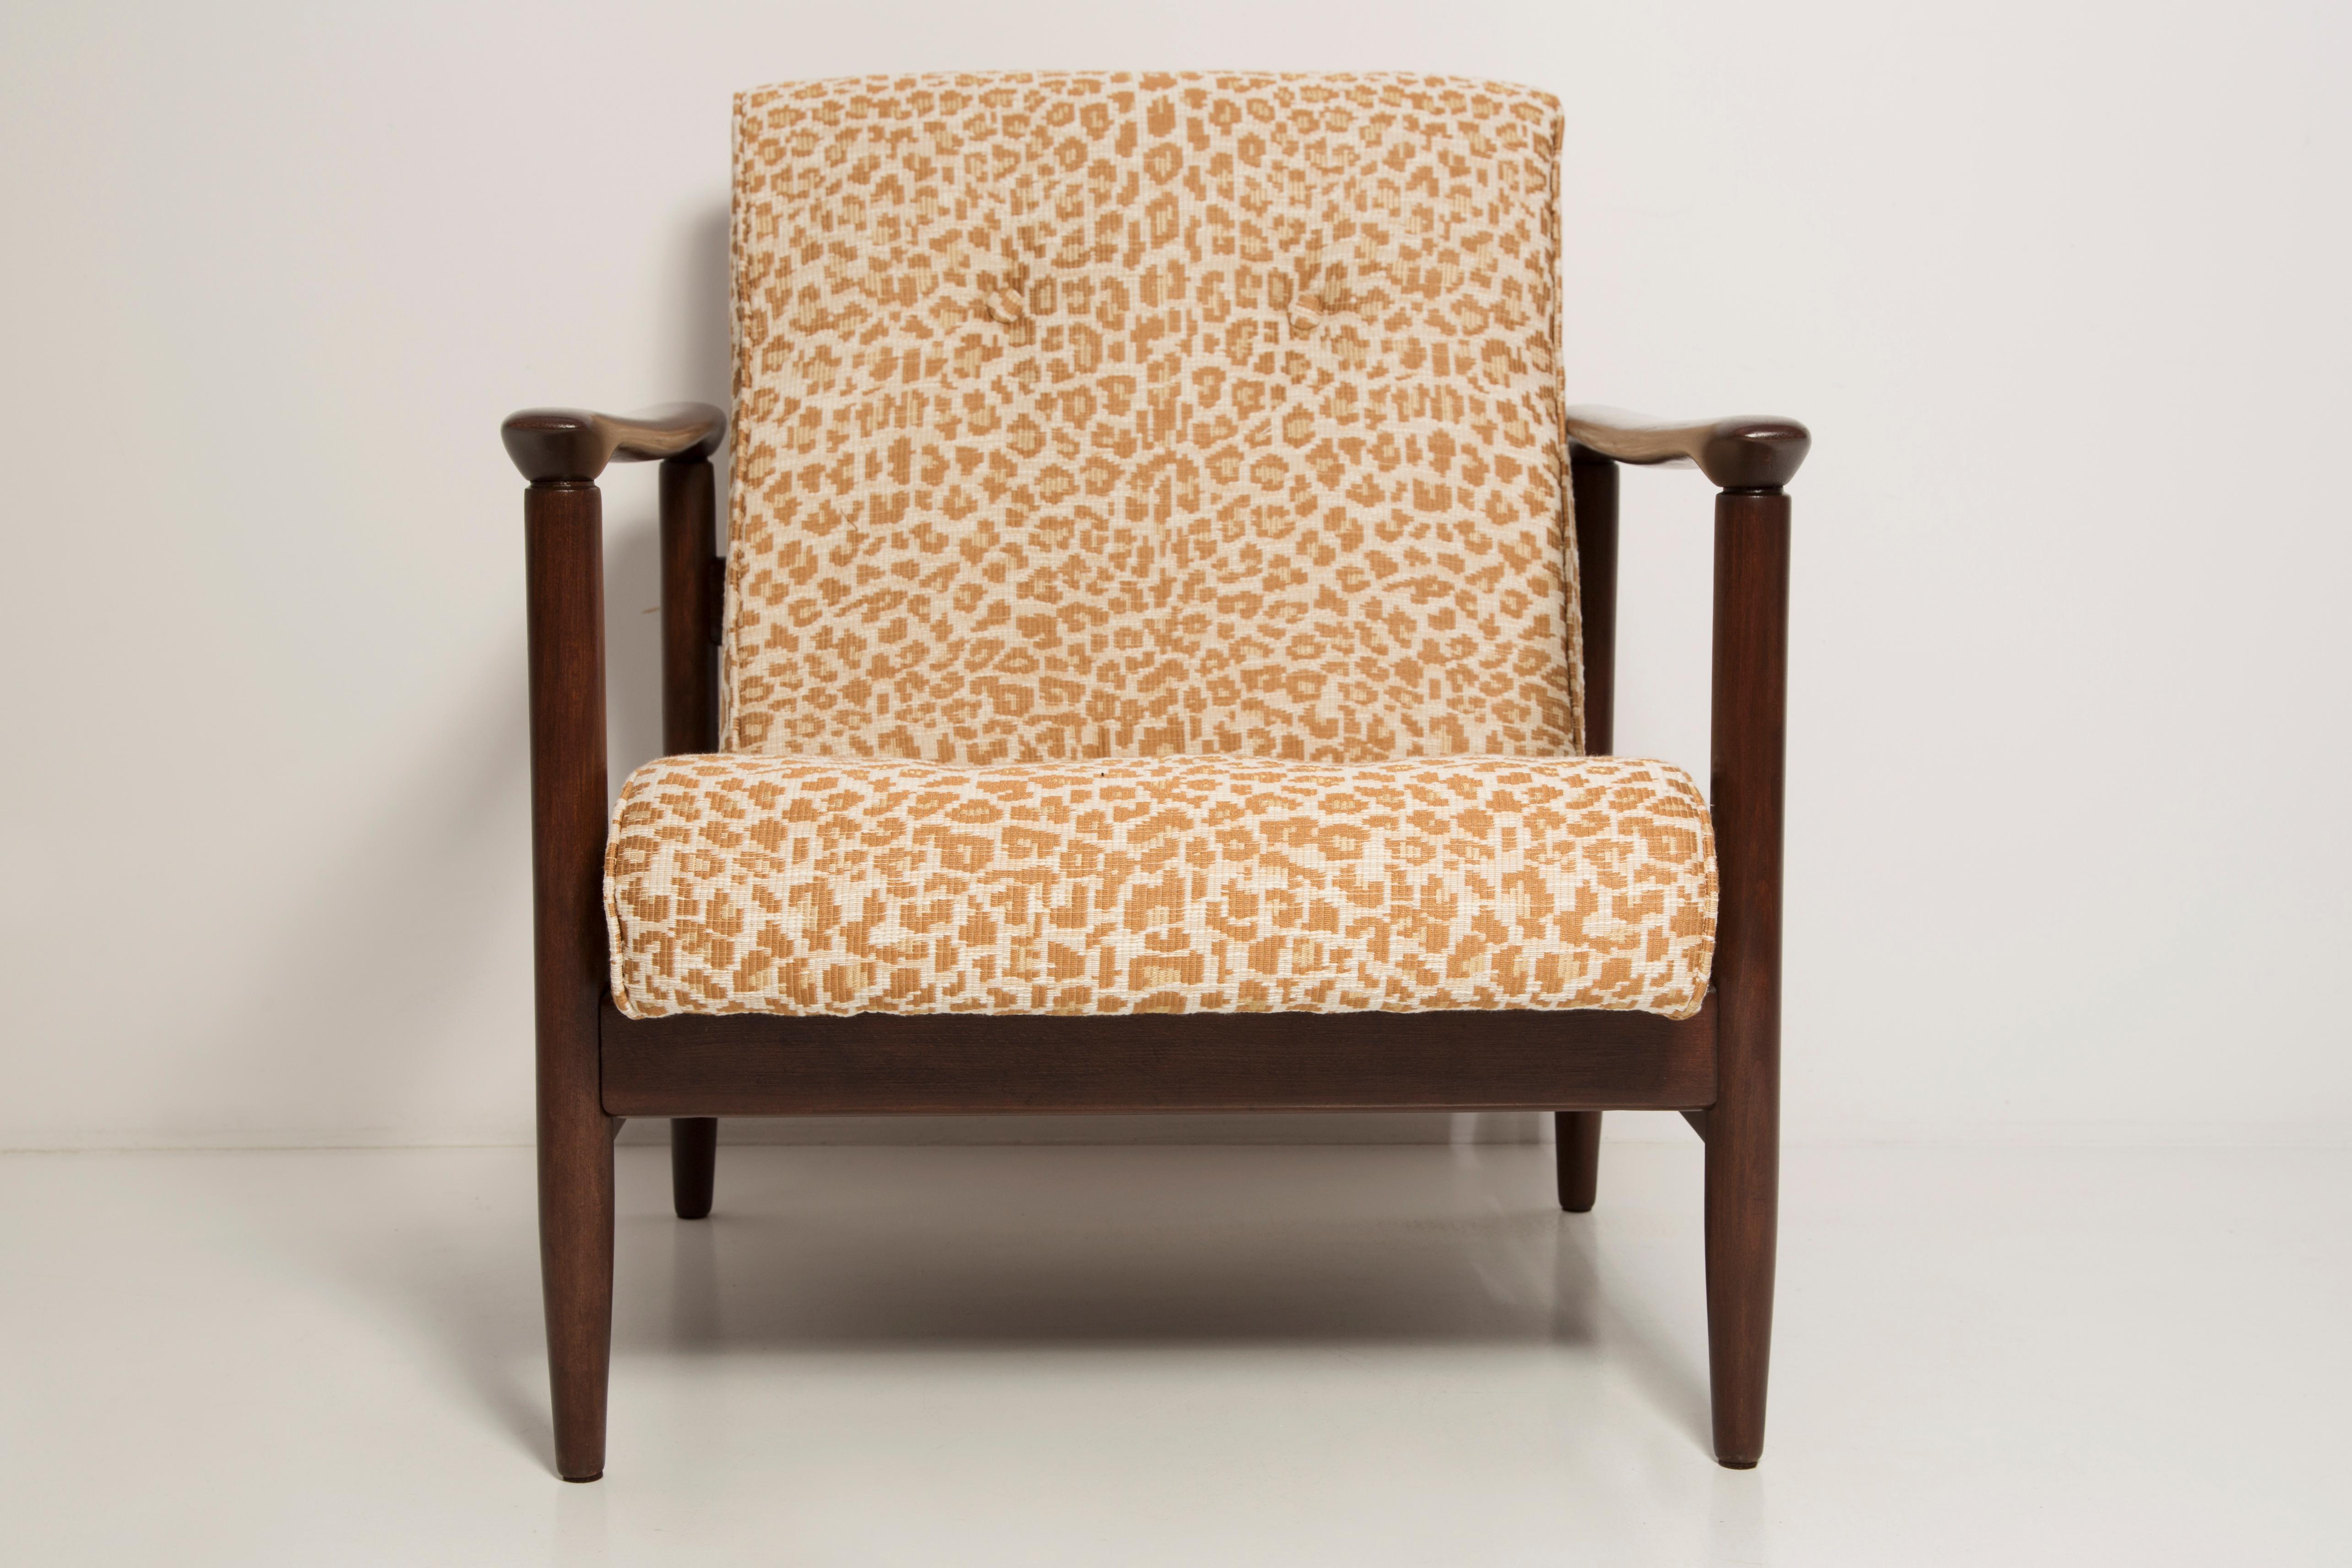 Hand-Crafted Pair of Mid-Century Pixel Leopard Armchairs, GFM 142, Edmund Homa, Europe, 1960s For Sale